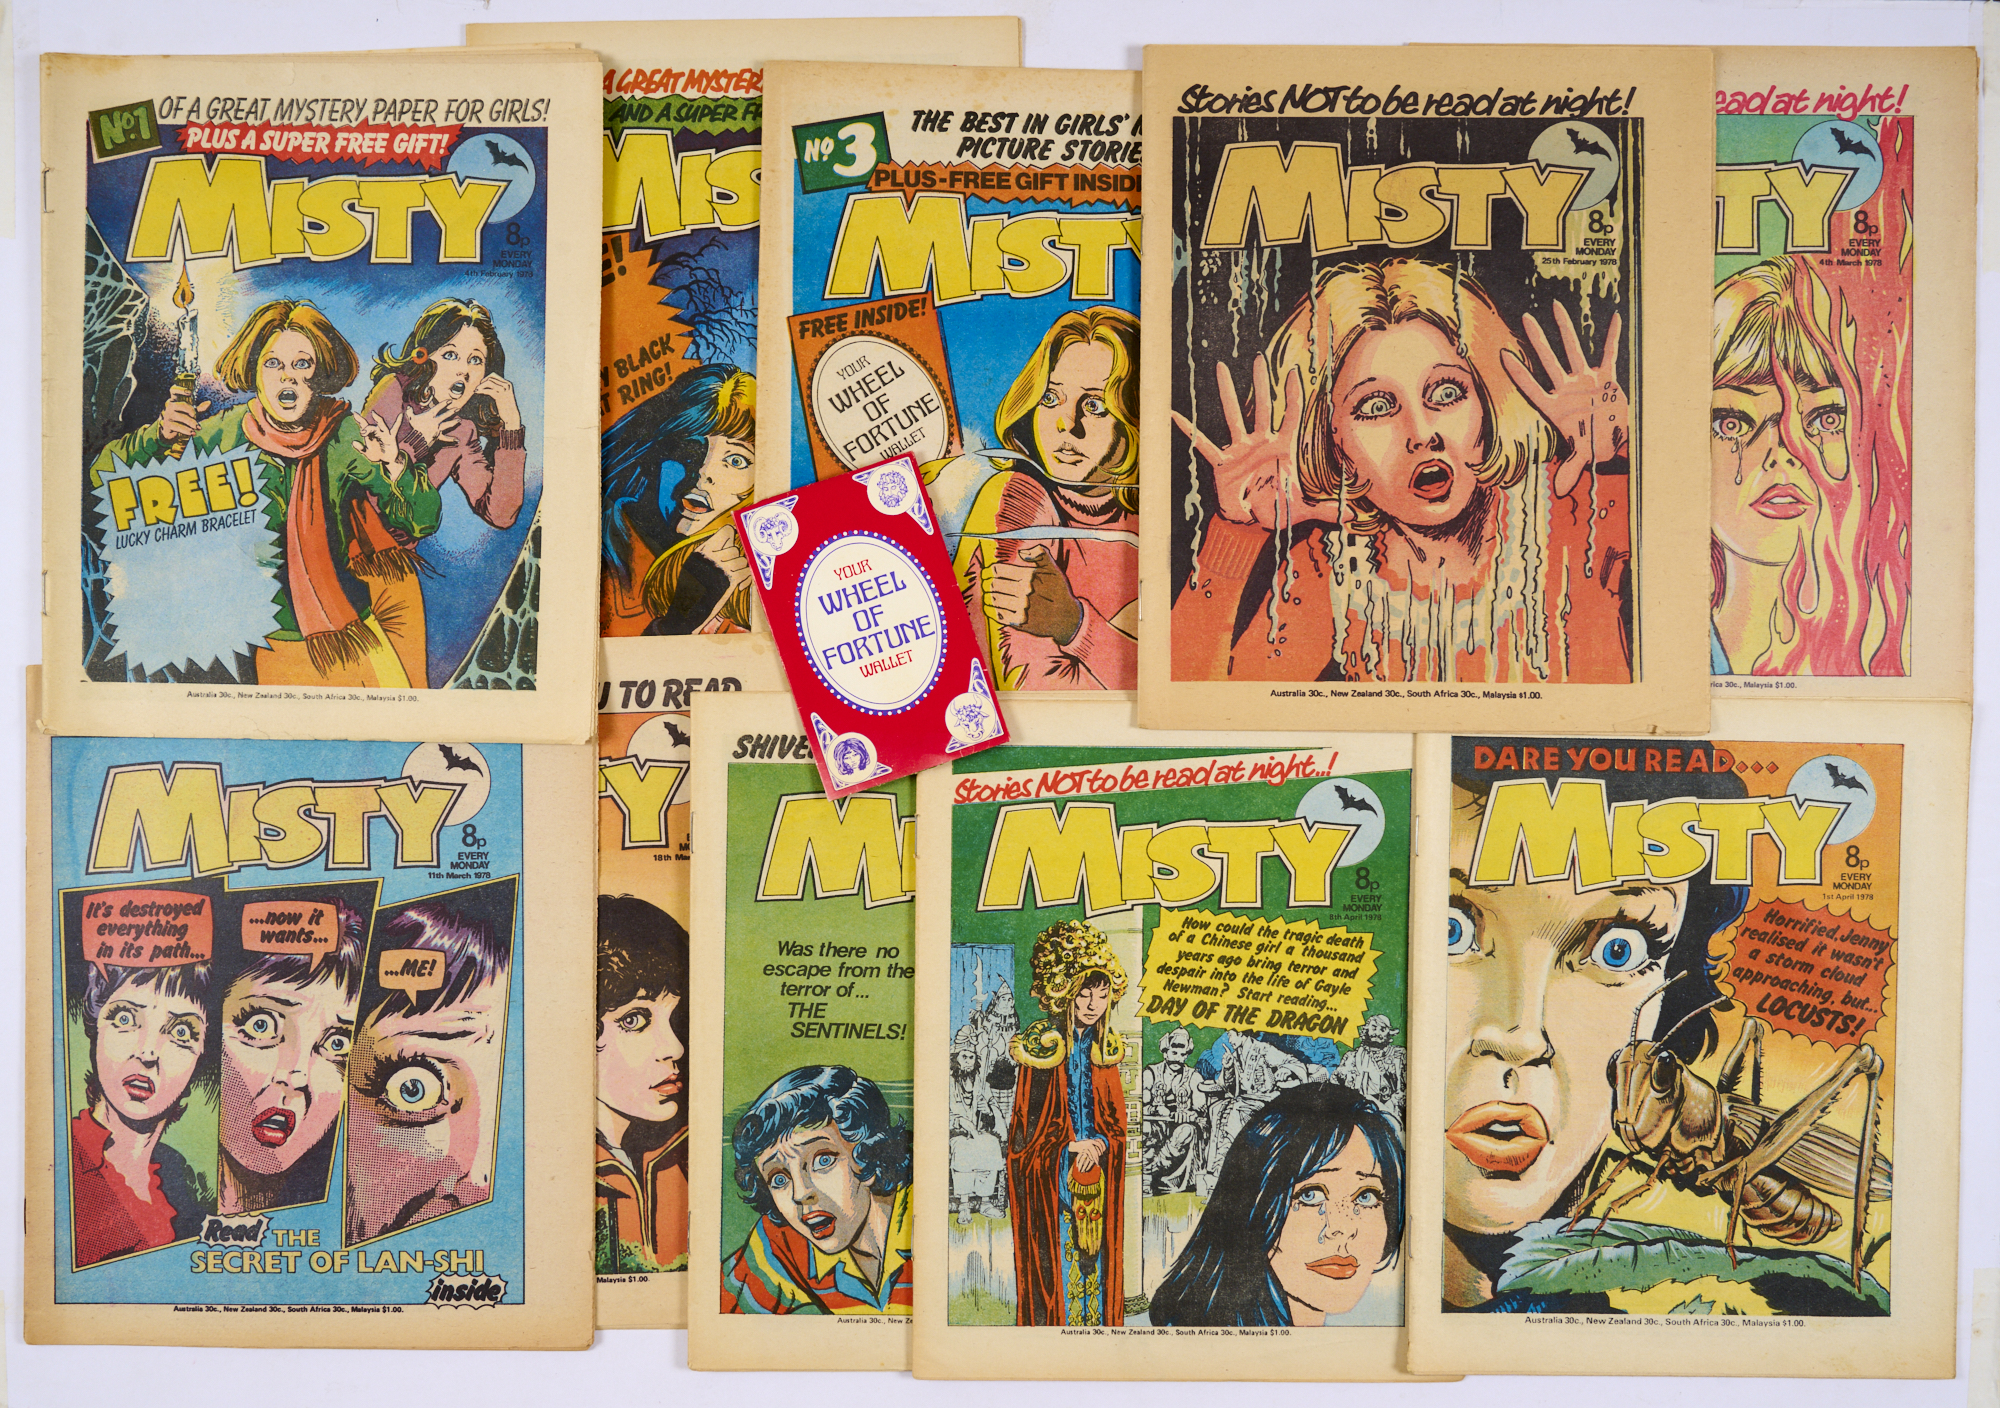 Misty (1978) 1-10. No. 3 wfg Wheel of Fortune Wallet. Girls, Ghouls and Ghost stories. From The